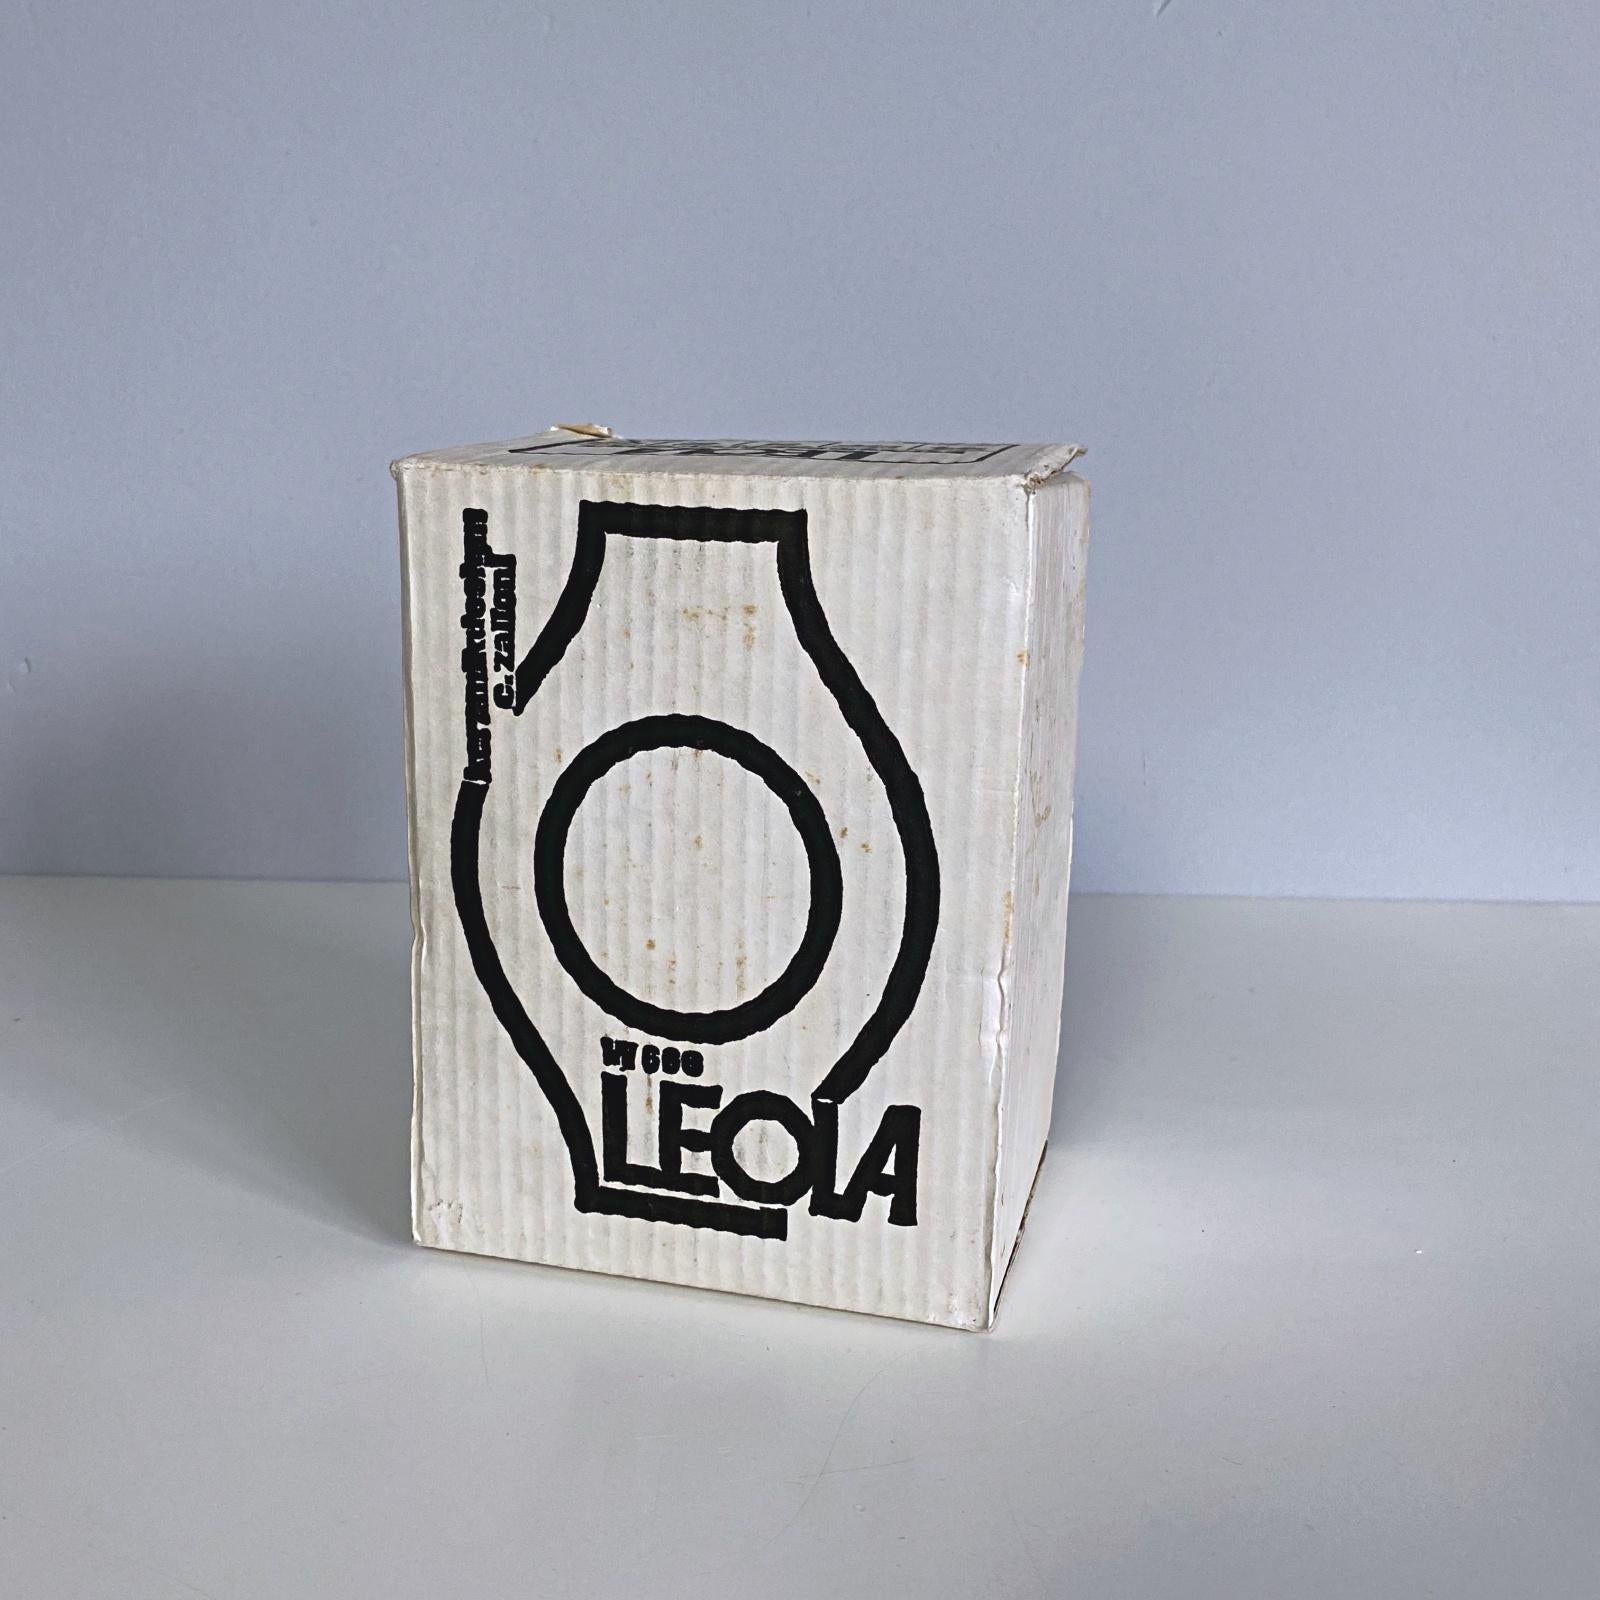 17 Modernist Ceramic Wall Lamps by Zalloni for Leola, 1960s, Germany For Sale 5